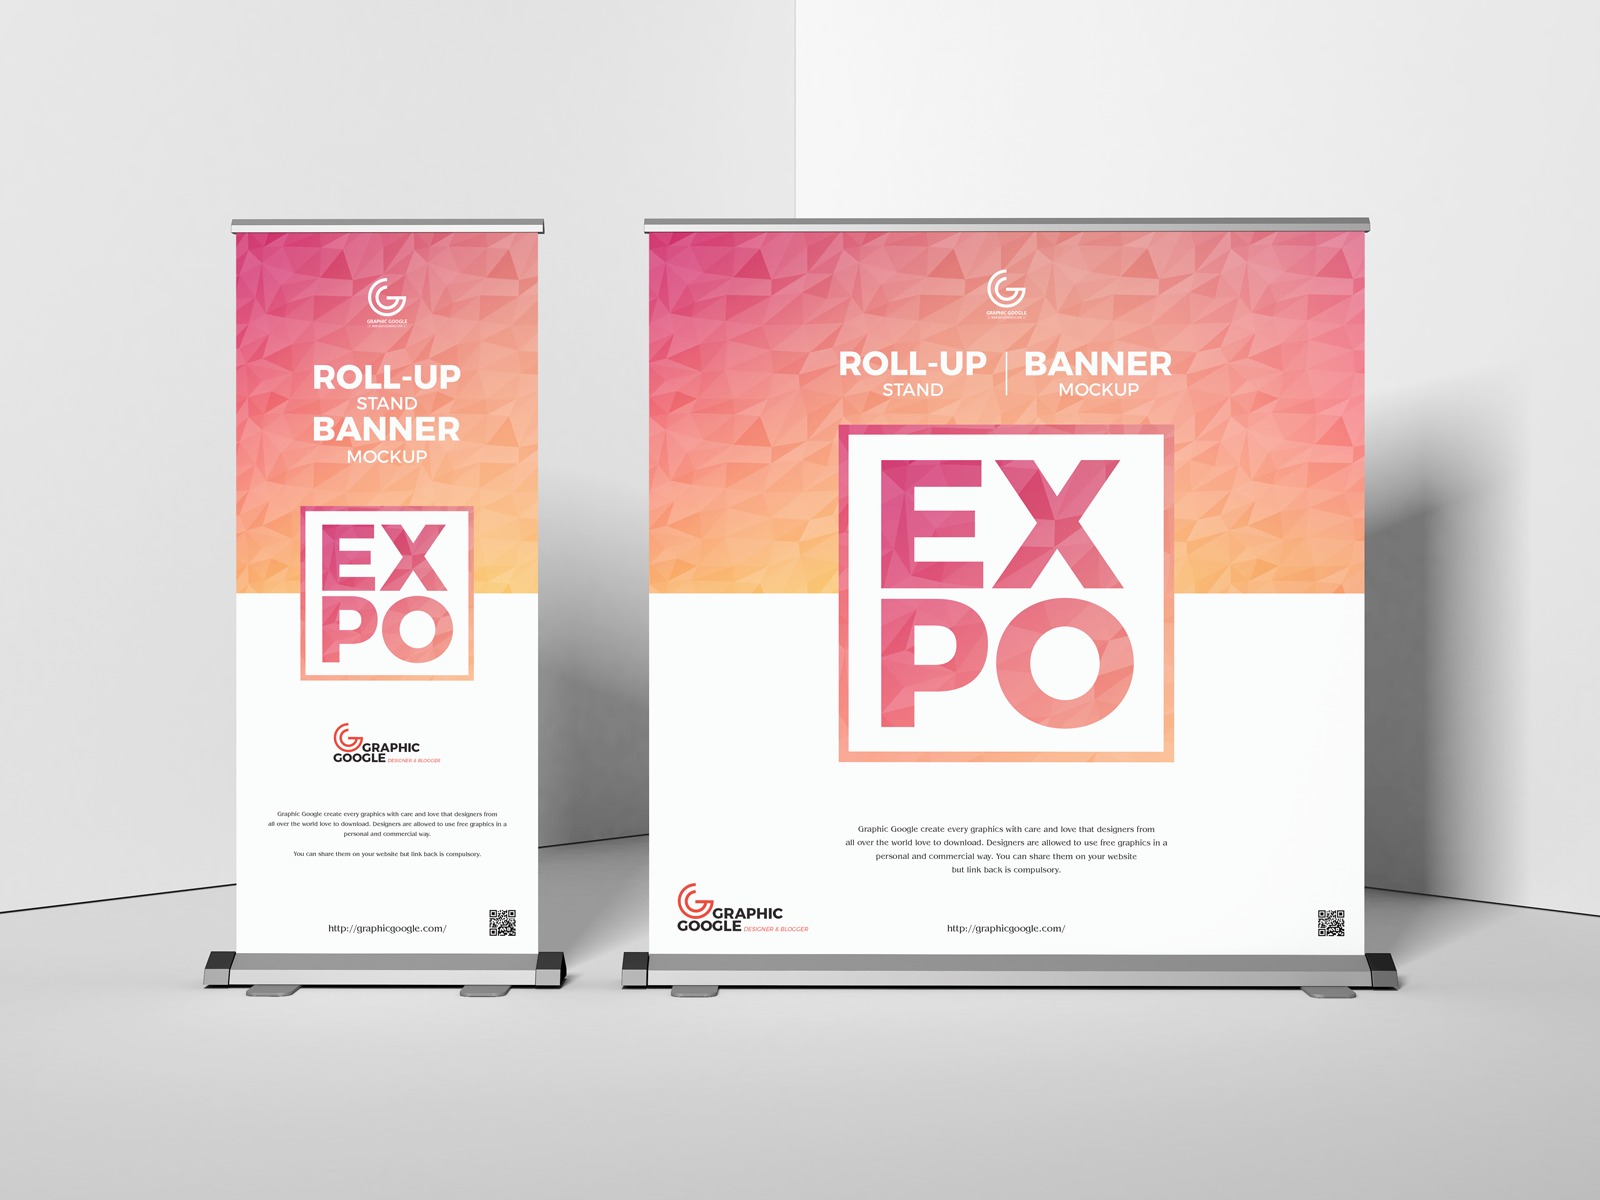 Download Free Expo Roll-Up Stand Banner Mockup by Graphic Google on ...